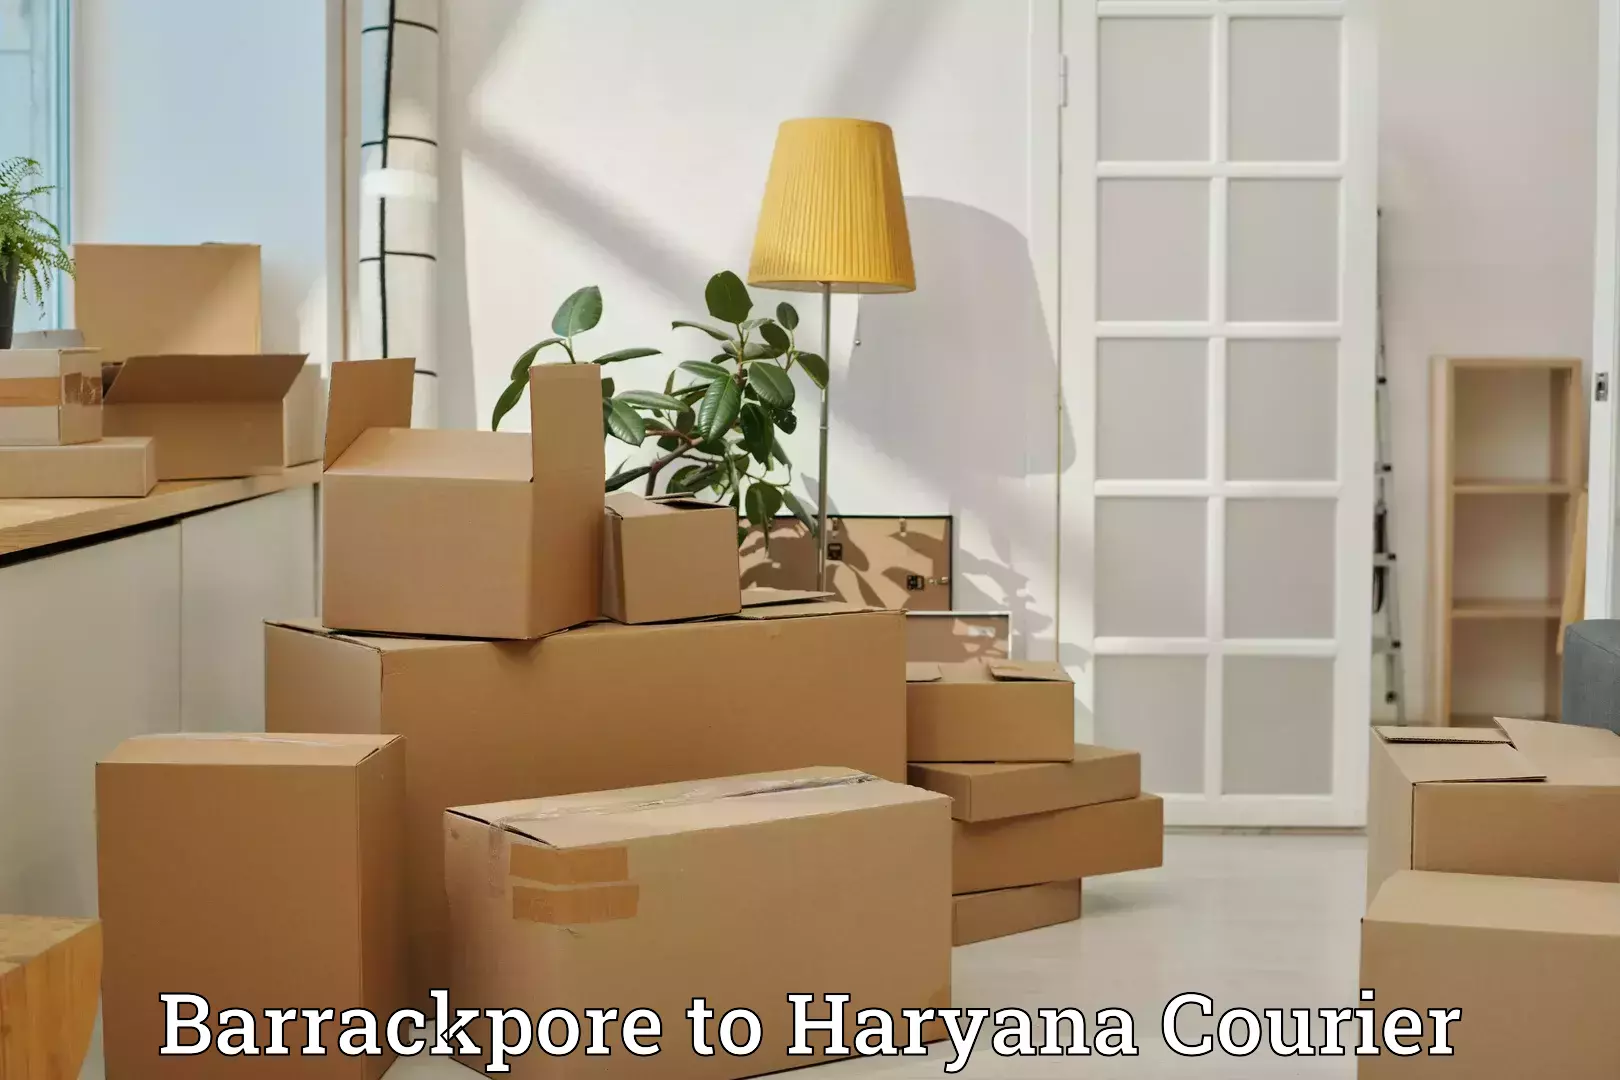 Luggage delivery app Barrackpore to Gurugram